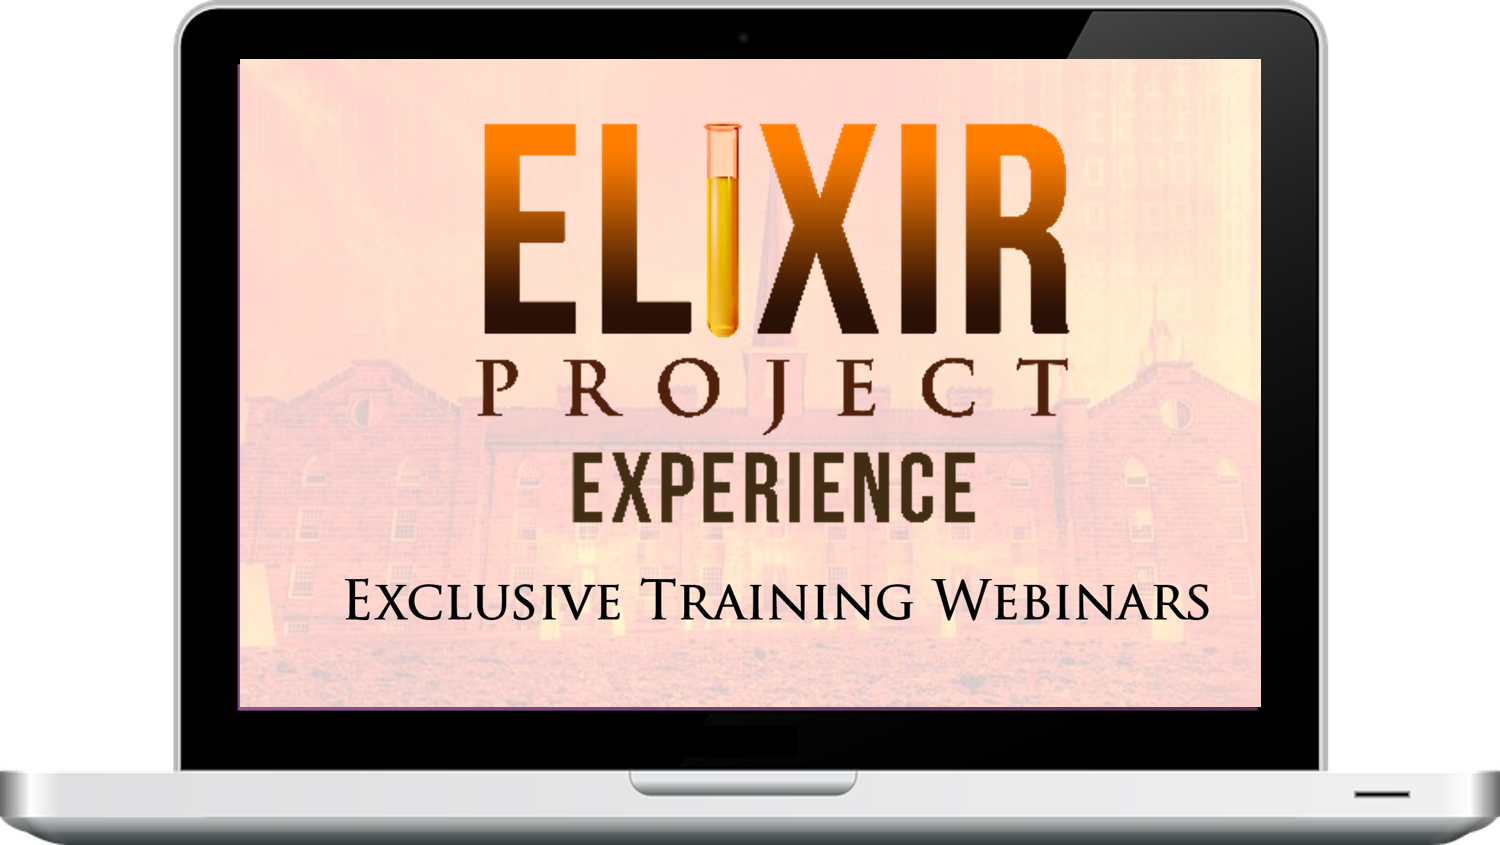 Experience Join — Elixir Project Experience